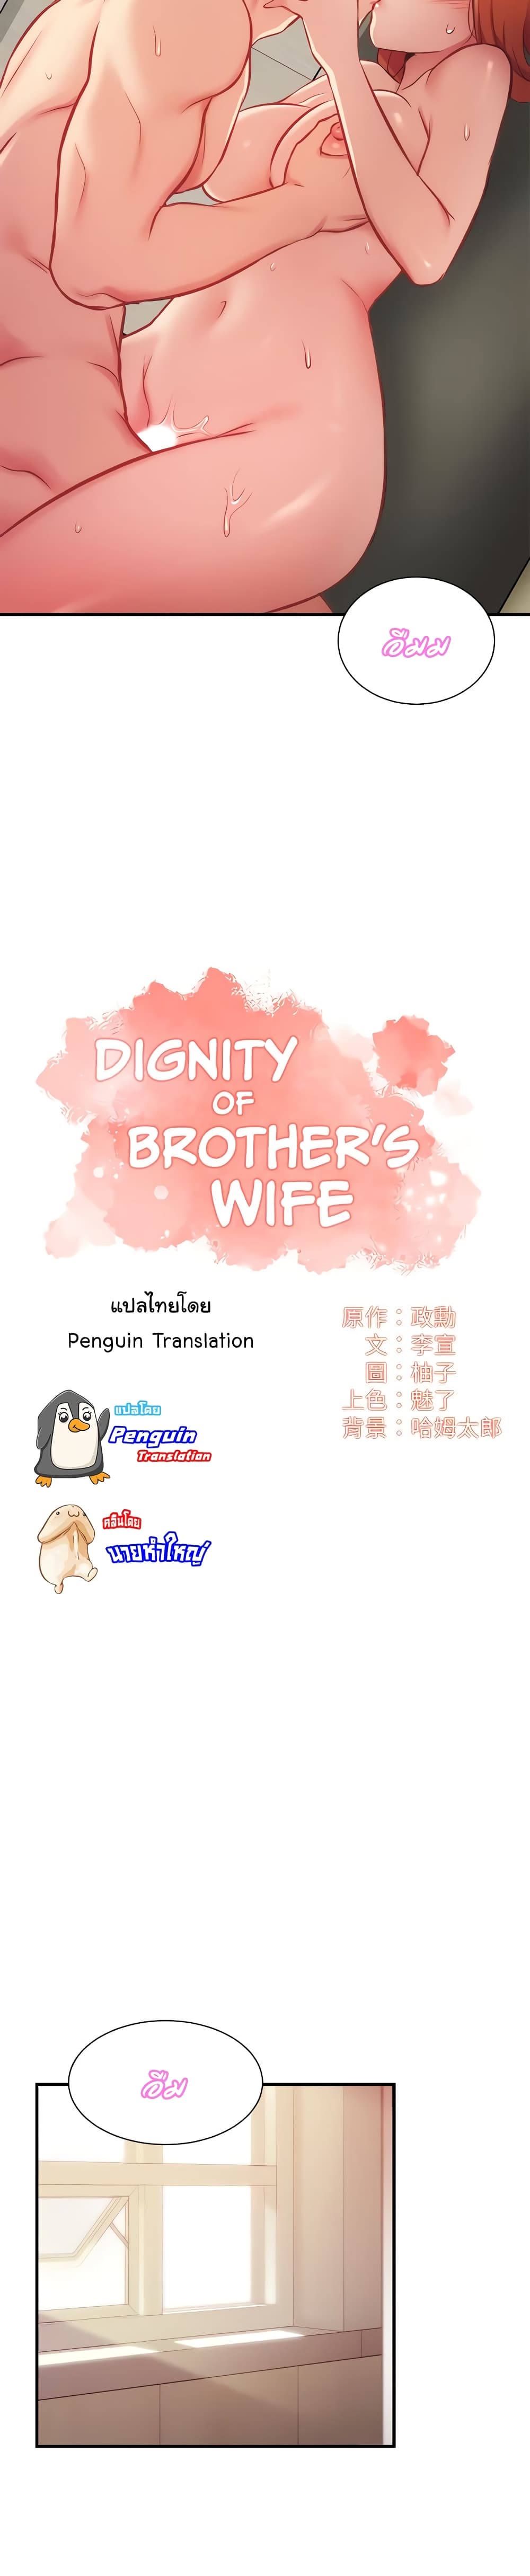 Brother's Wife Dignity 25-25